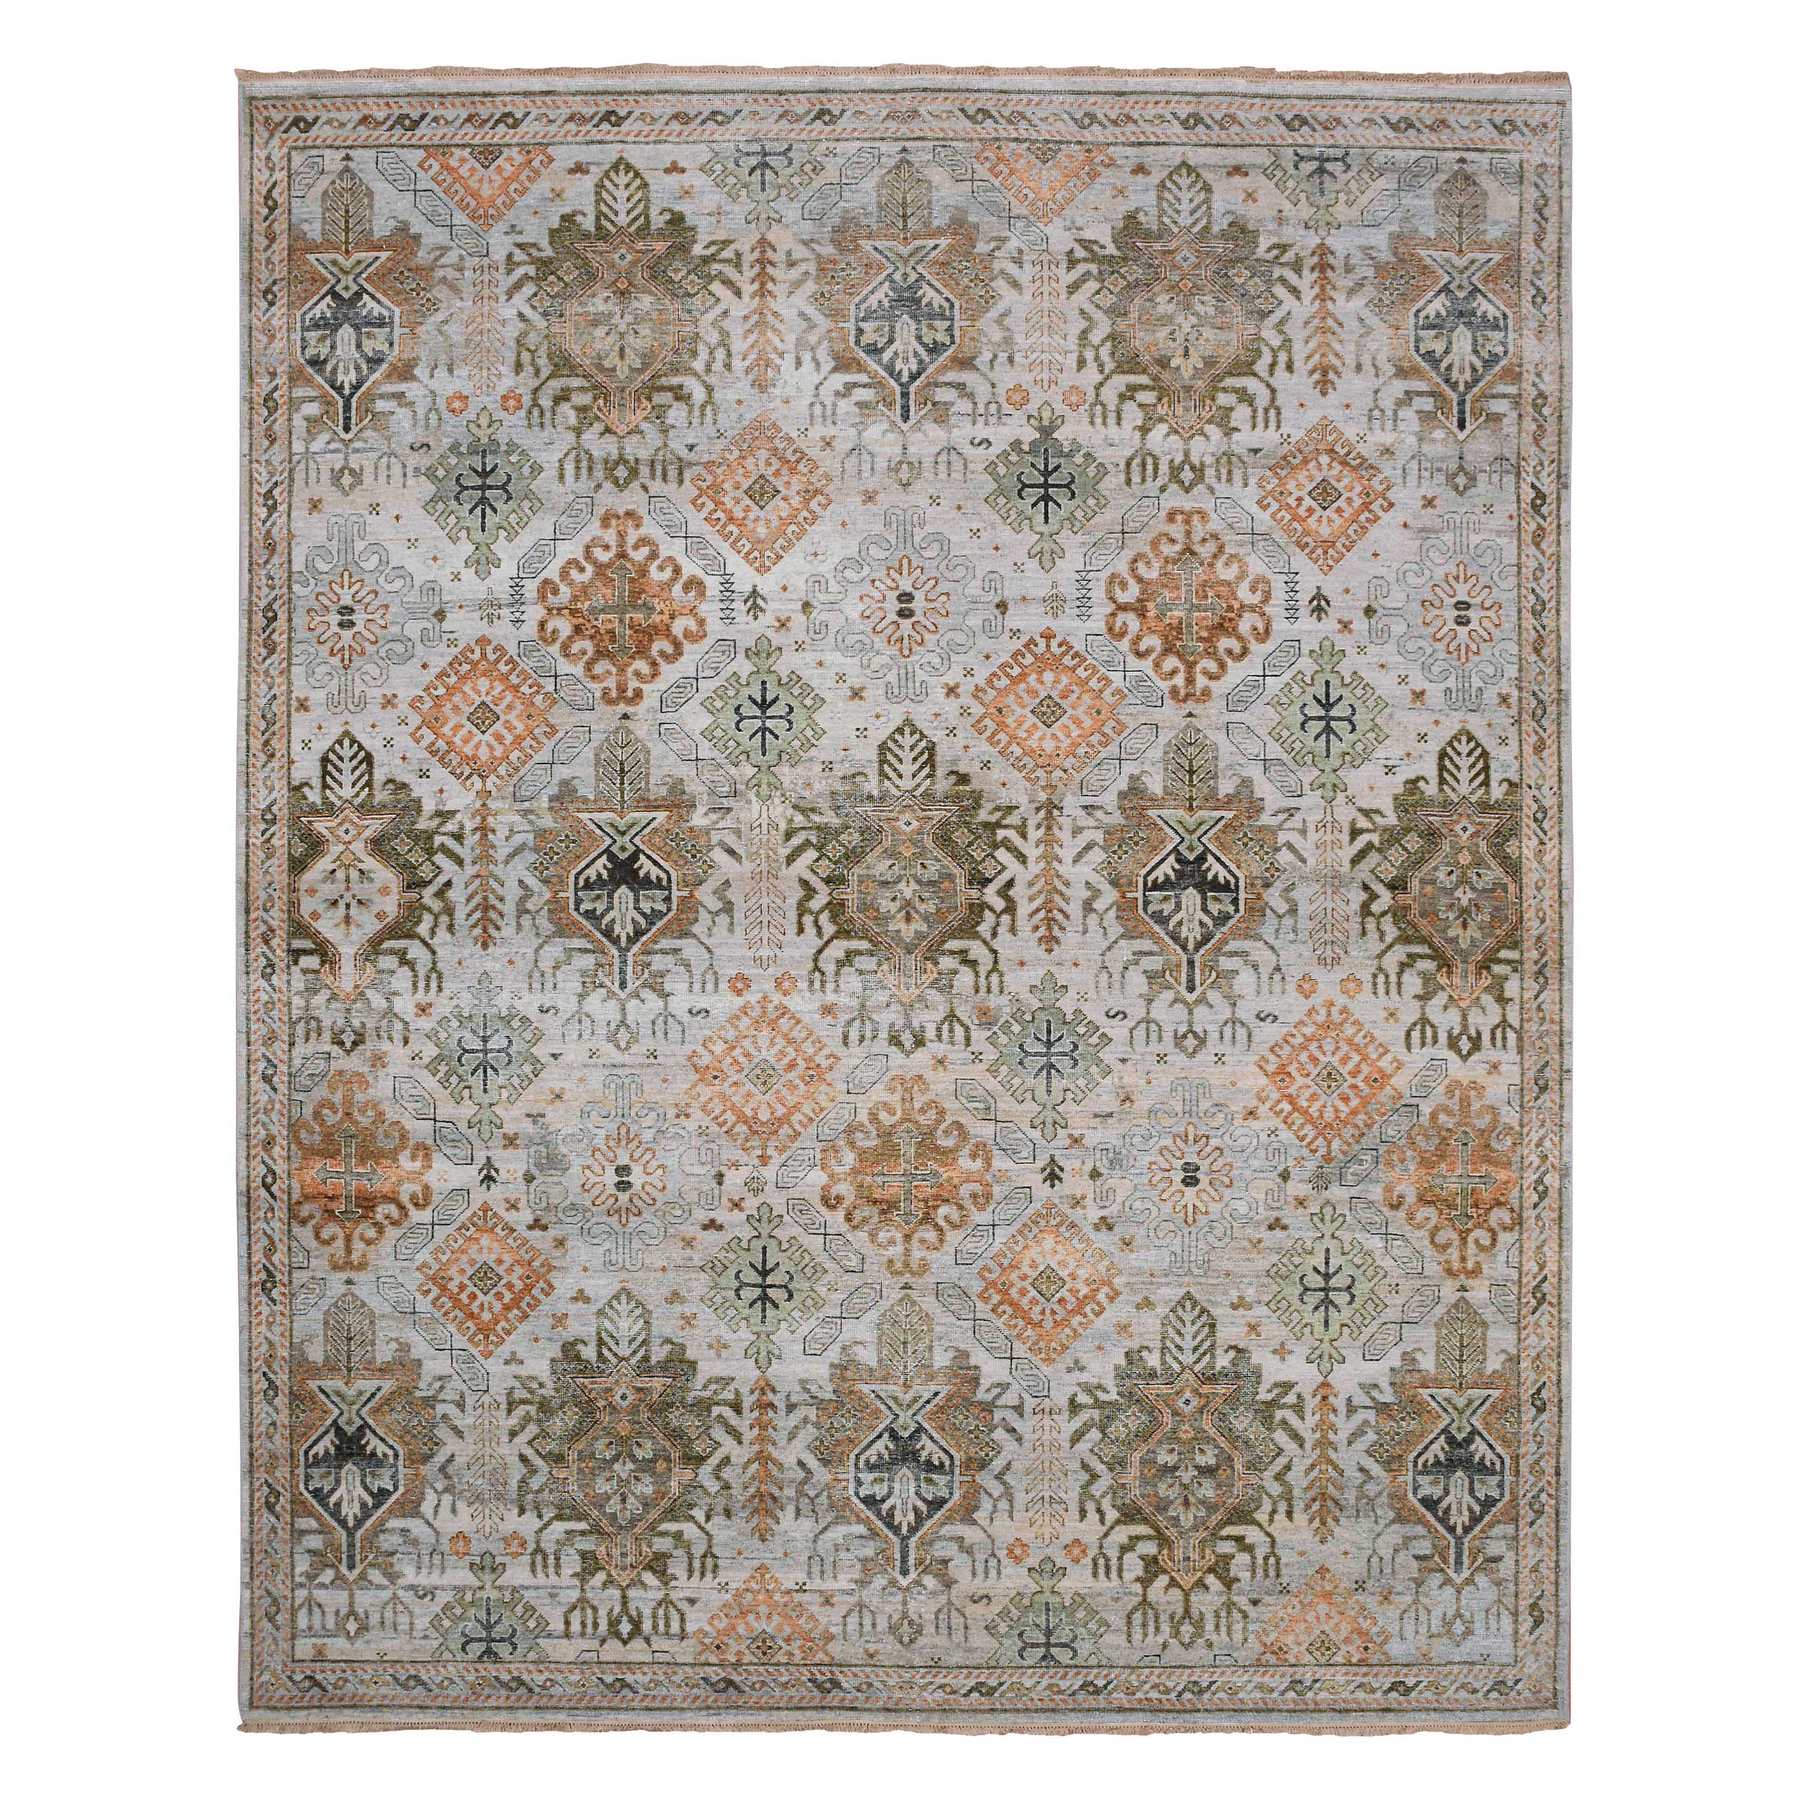  Wool Hand-Knotted Area Rug 8'2